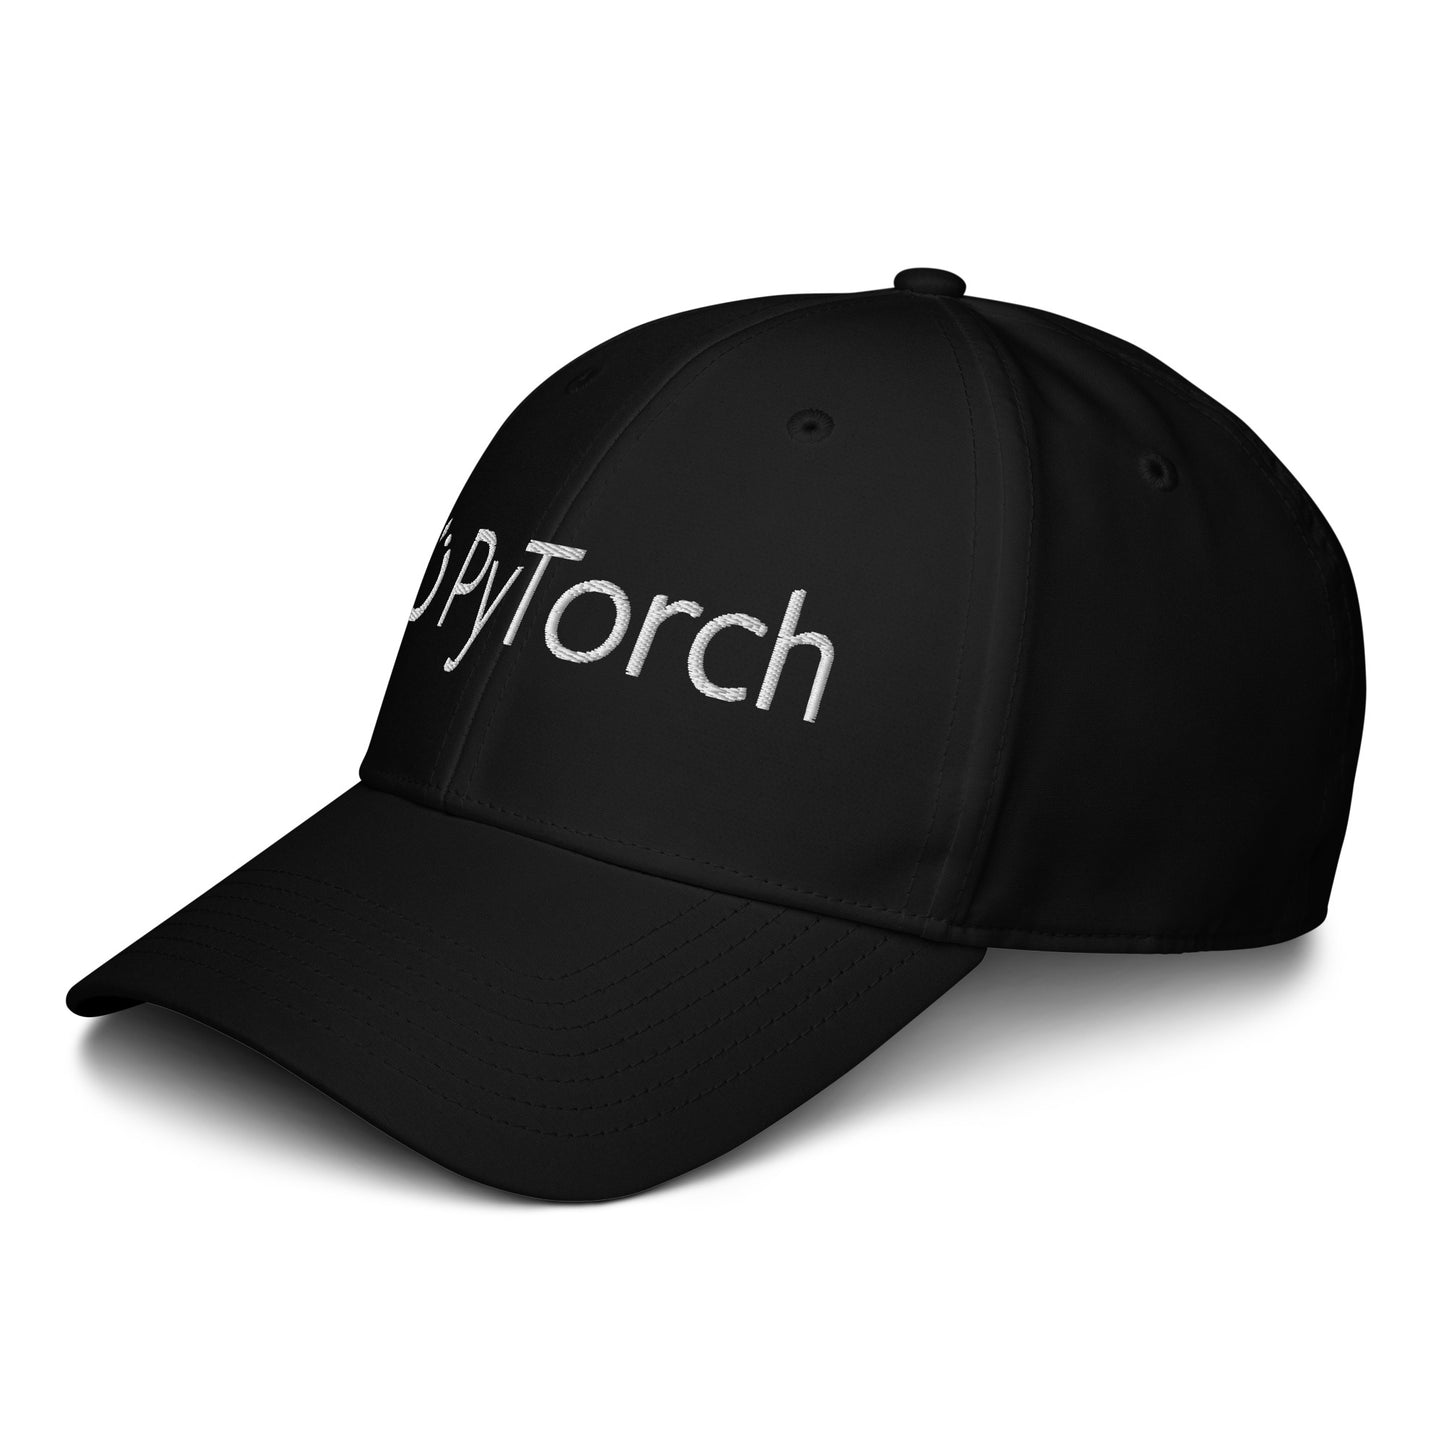 PyTorch White Logo Embroidered adidas Cap